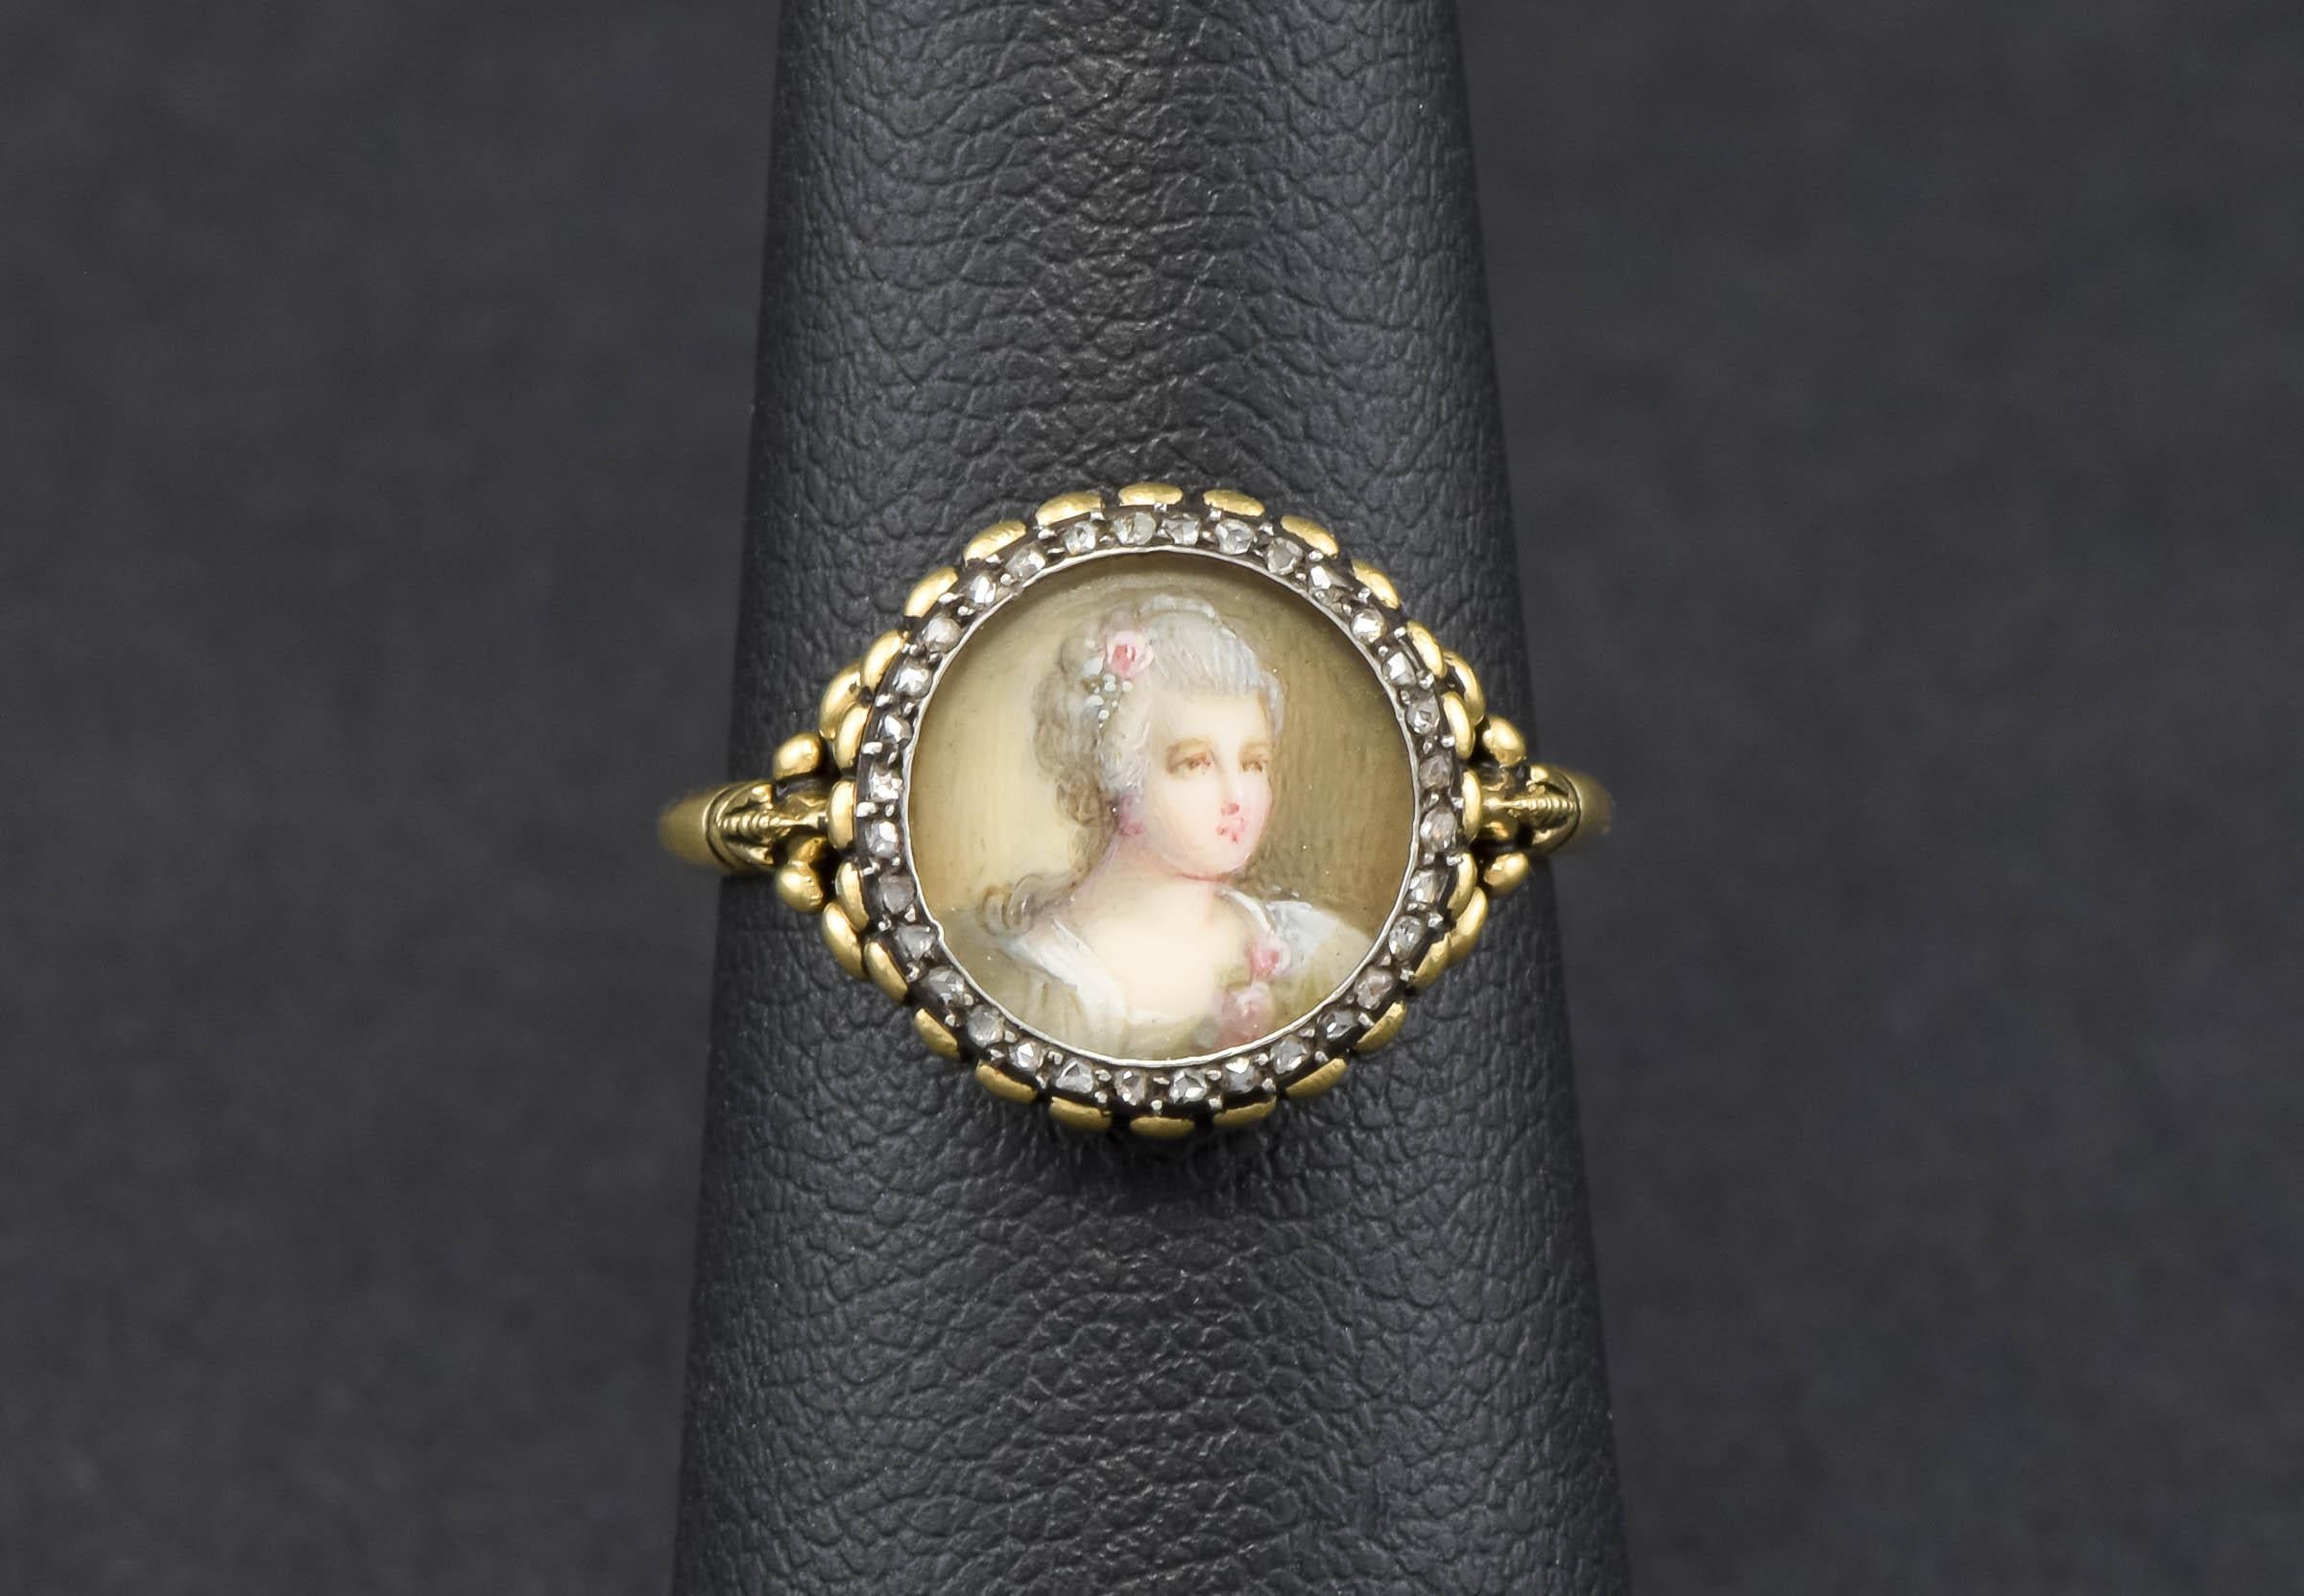 This special ring is one of a kind, converted from a fine antique hand painted portrait stickpin with diamonds.

Finely crafted of 18K yellow gold and silver, the ring features an original antique hand painted watercolor portrait of a Georgian woman